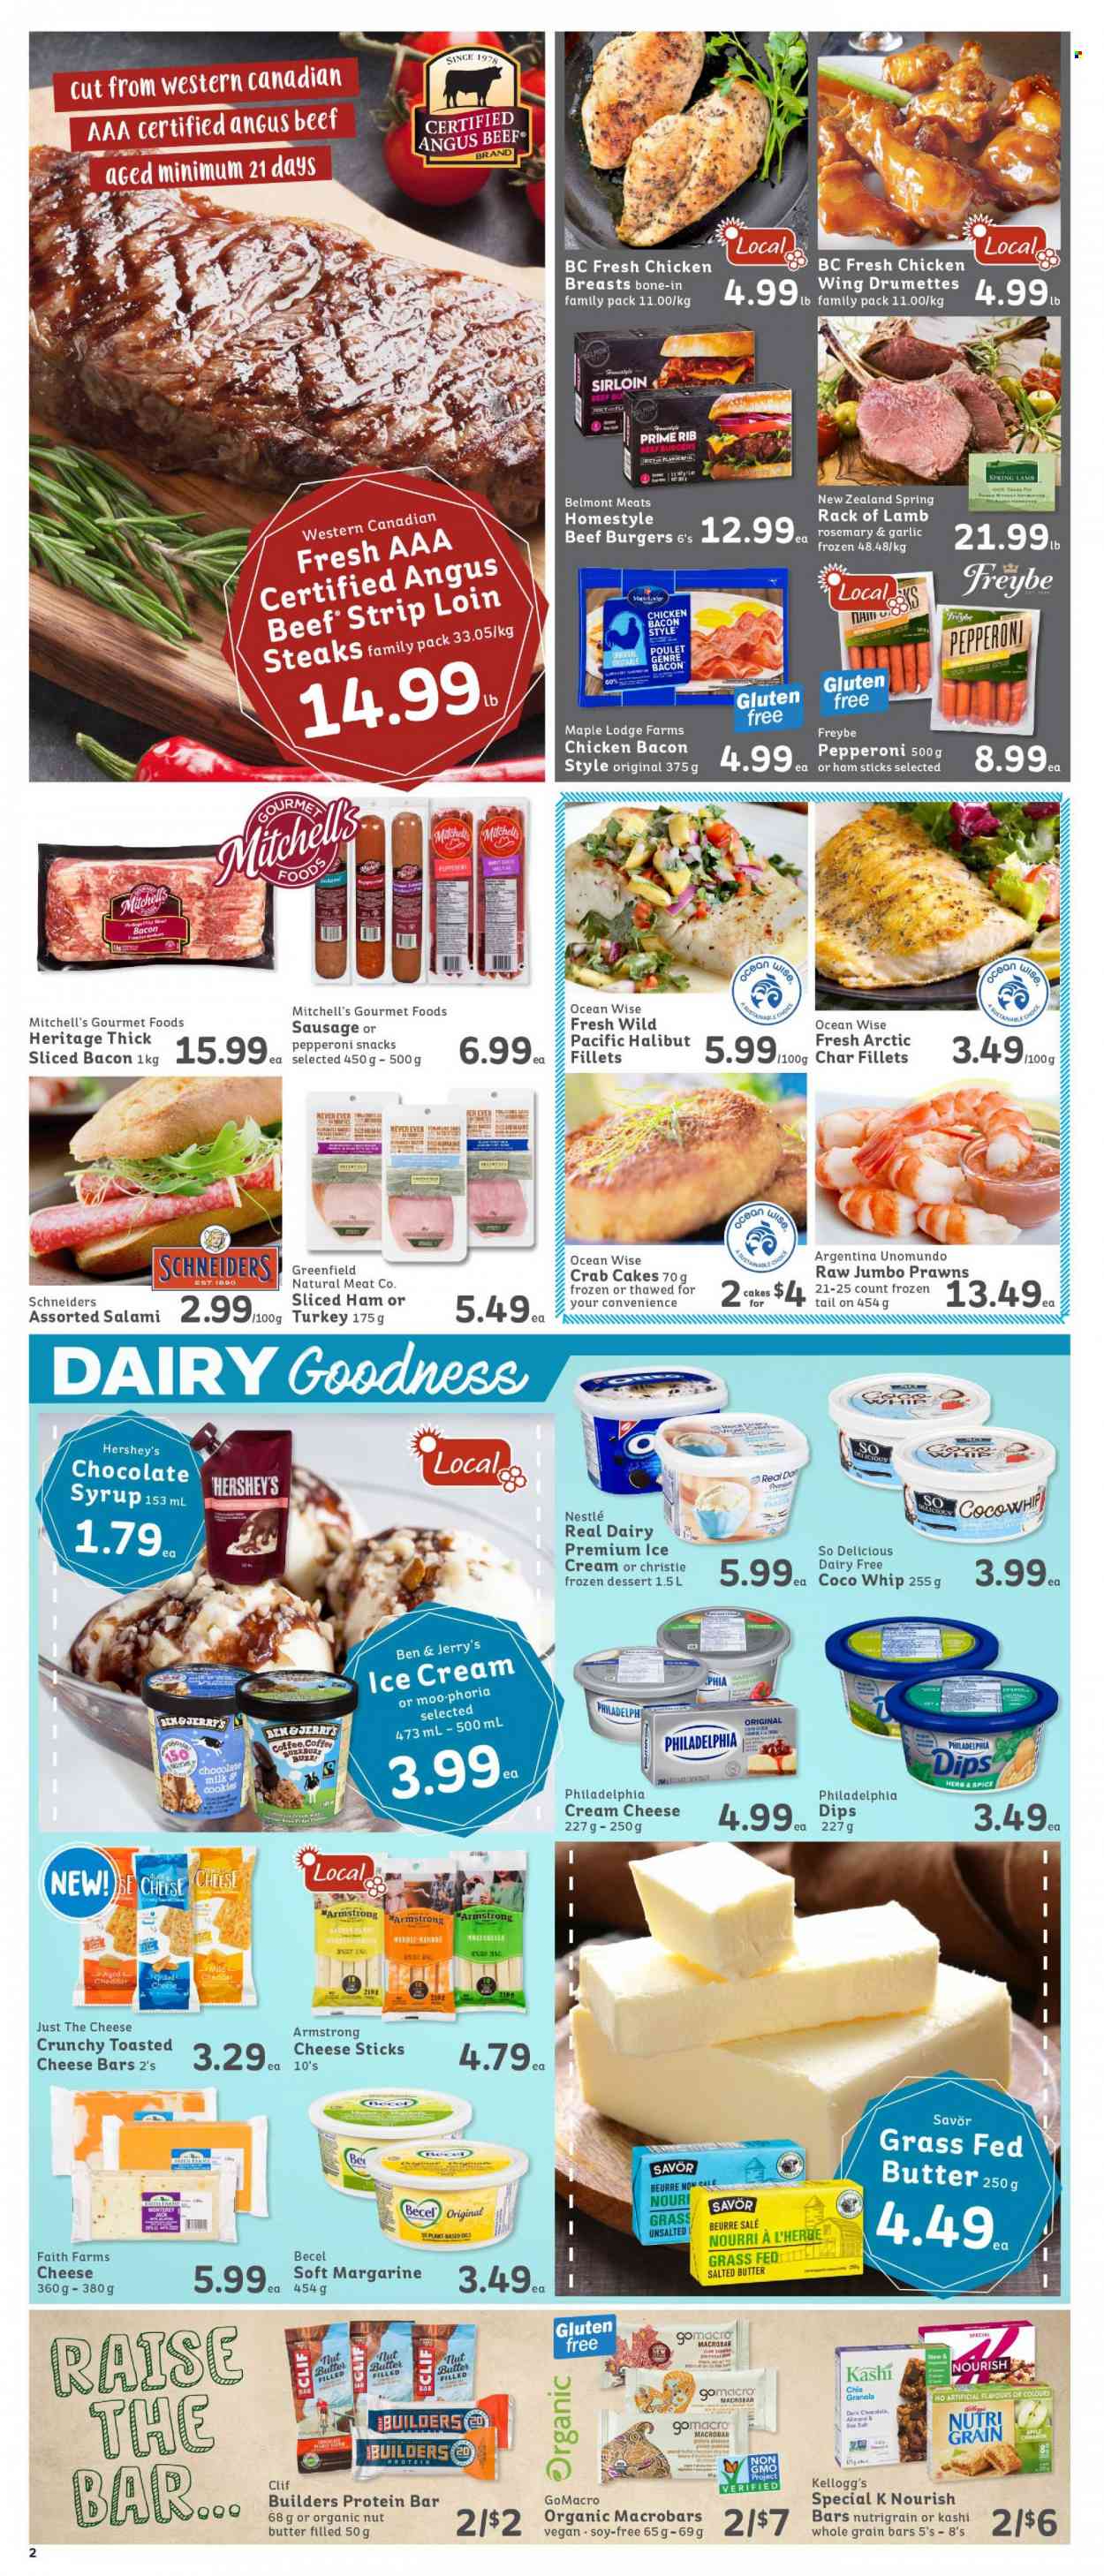 thumbnail - IGA Simple Goodness Flyer - September 17, 2021 - September 23, 2021 - Sales products - halibut, prawns, crab cake, hamburger, beef burger, bacon, salami, sausage, pepperoni, cream cheese, mild cheddar, cheddar, cheese, milk, margarine, salted butter, ice cream, Hershey's, Ben & Jerry's, cheese sticks, cookies, milk chocolate, snack, Kellogg's, dark chocolate, protein bar, Nutri-Grain, rosemary, spice, cinnamon, peanut butter, syrup, nut butter, coffee, chicken breasts, beef meat, lamb meat, rack of lamb, Nestlé, granola, Philadelphia, steak. Page 3.